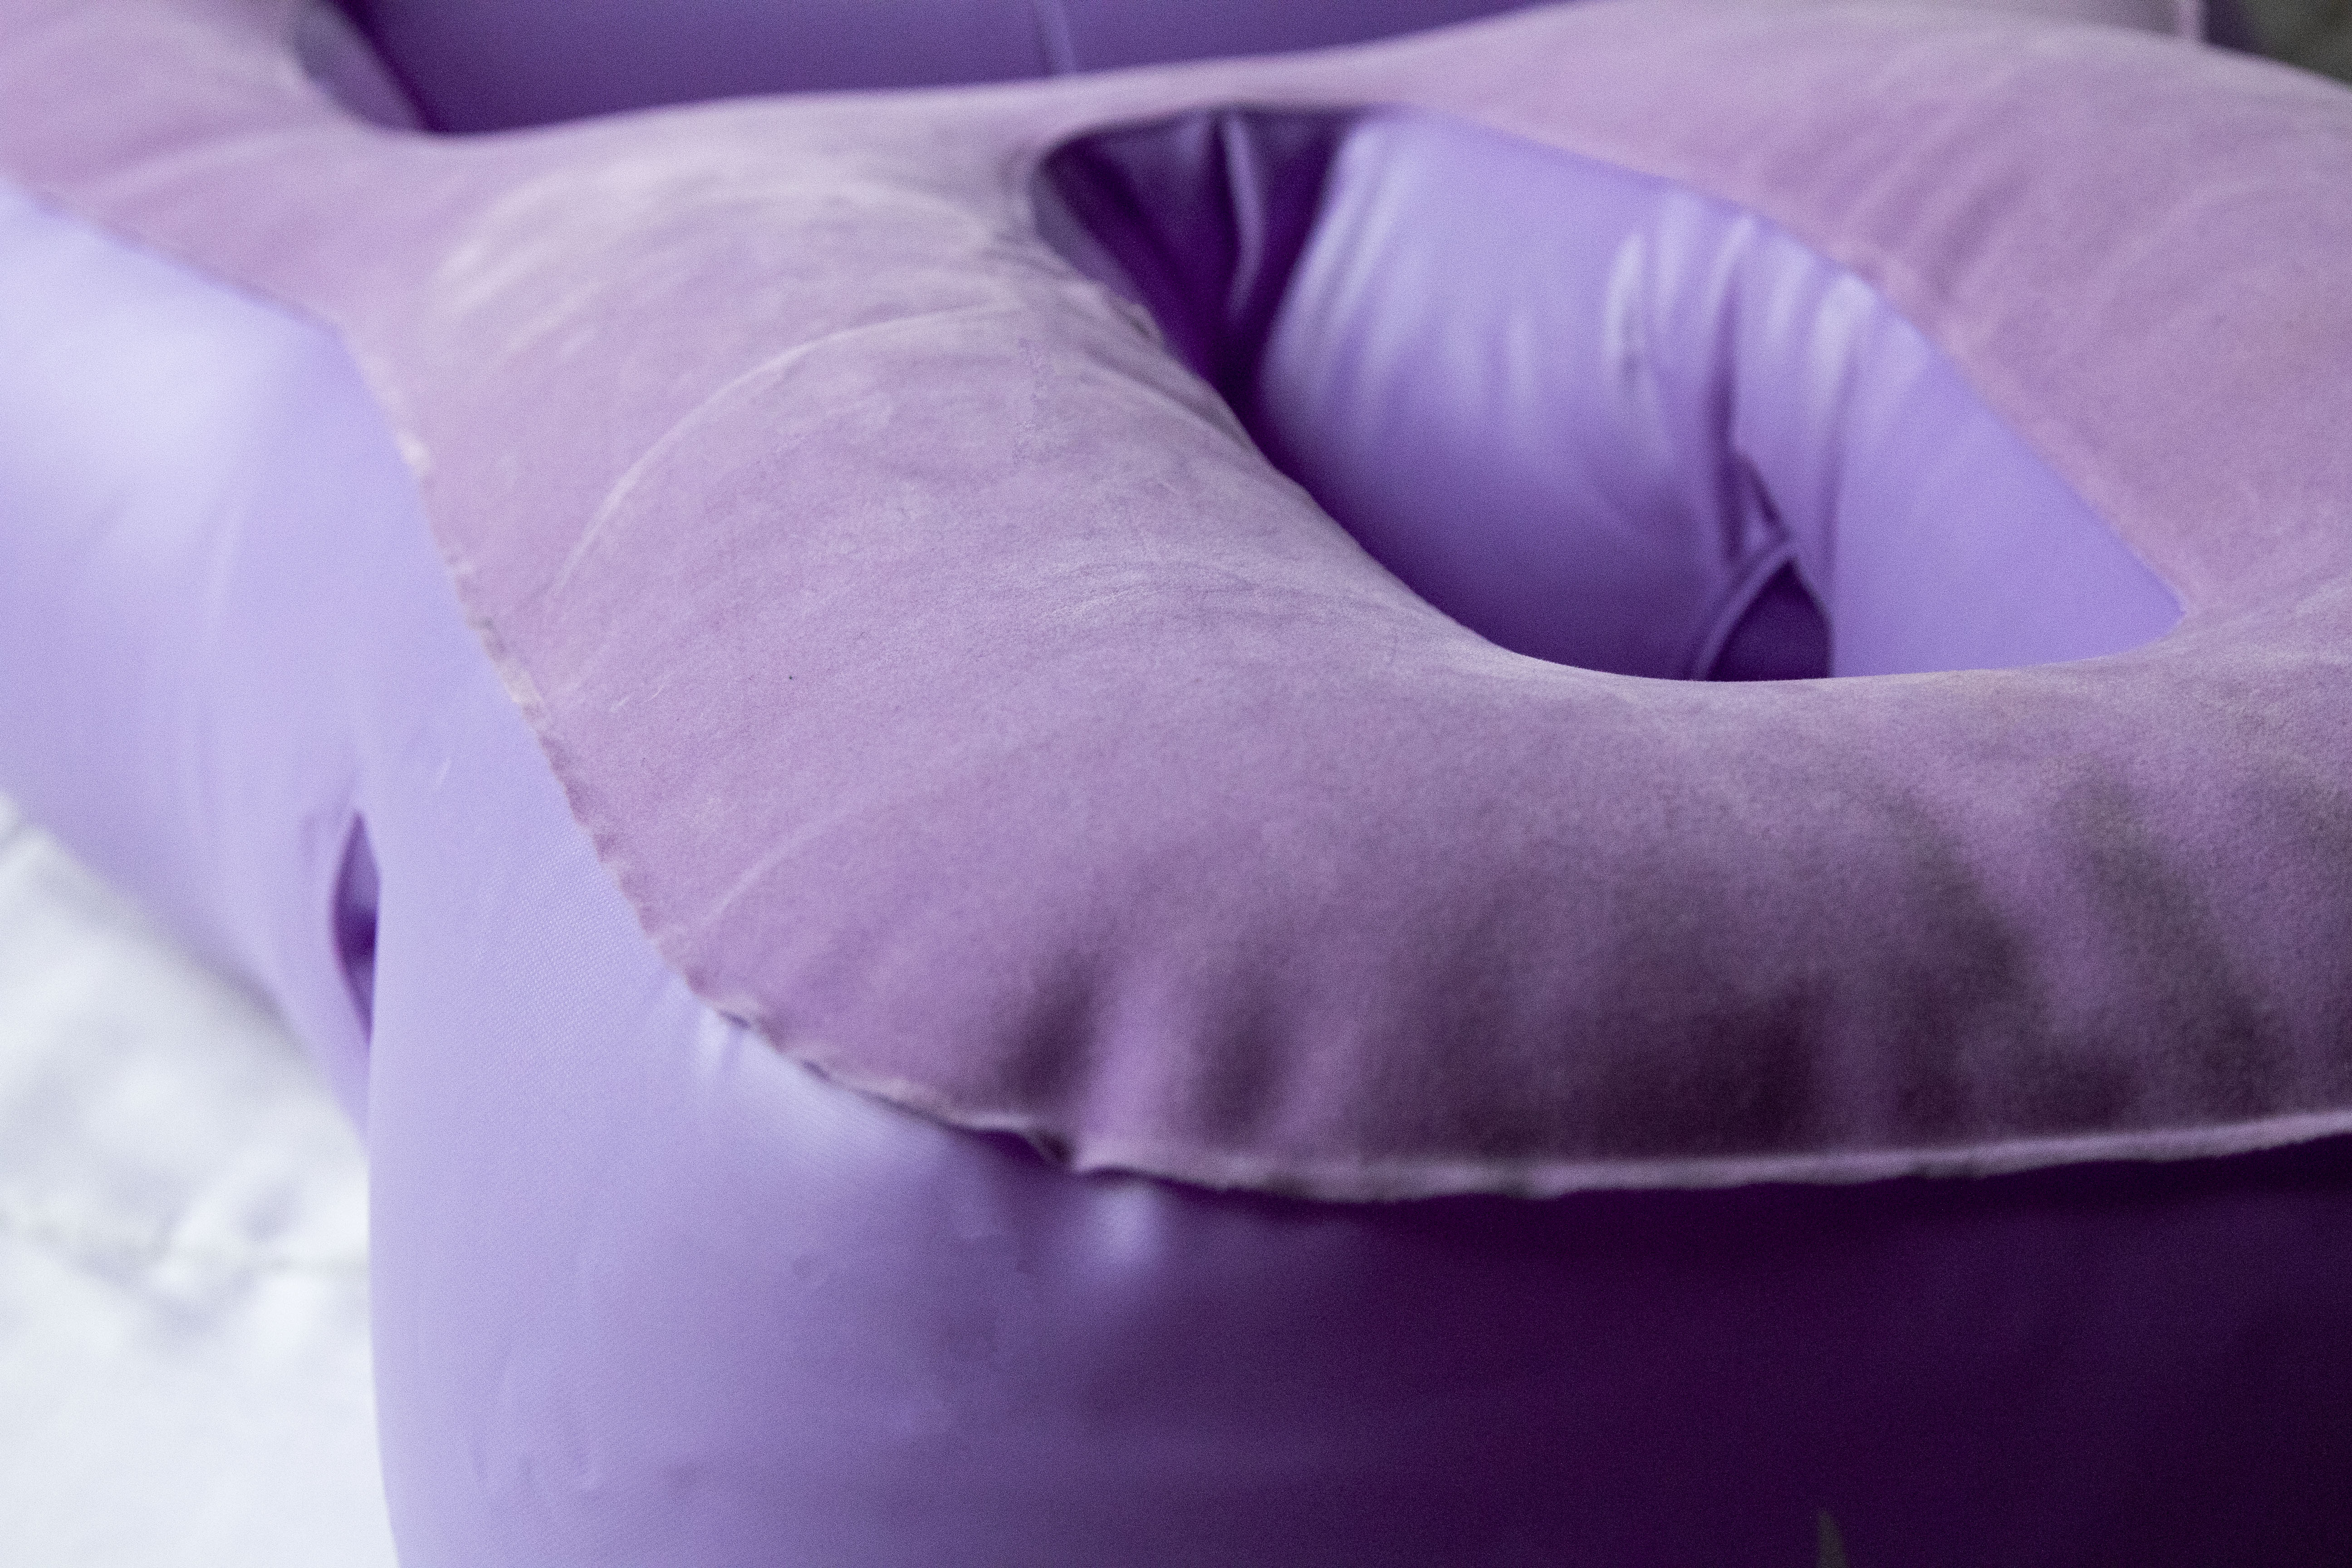 A purple, inflatable pregnancy pillow called Tummy Cradle, with a soft, fuzzy top that feels nice on bare skin.